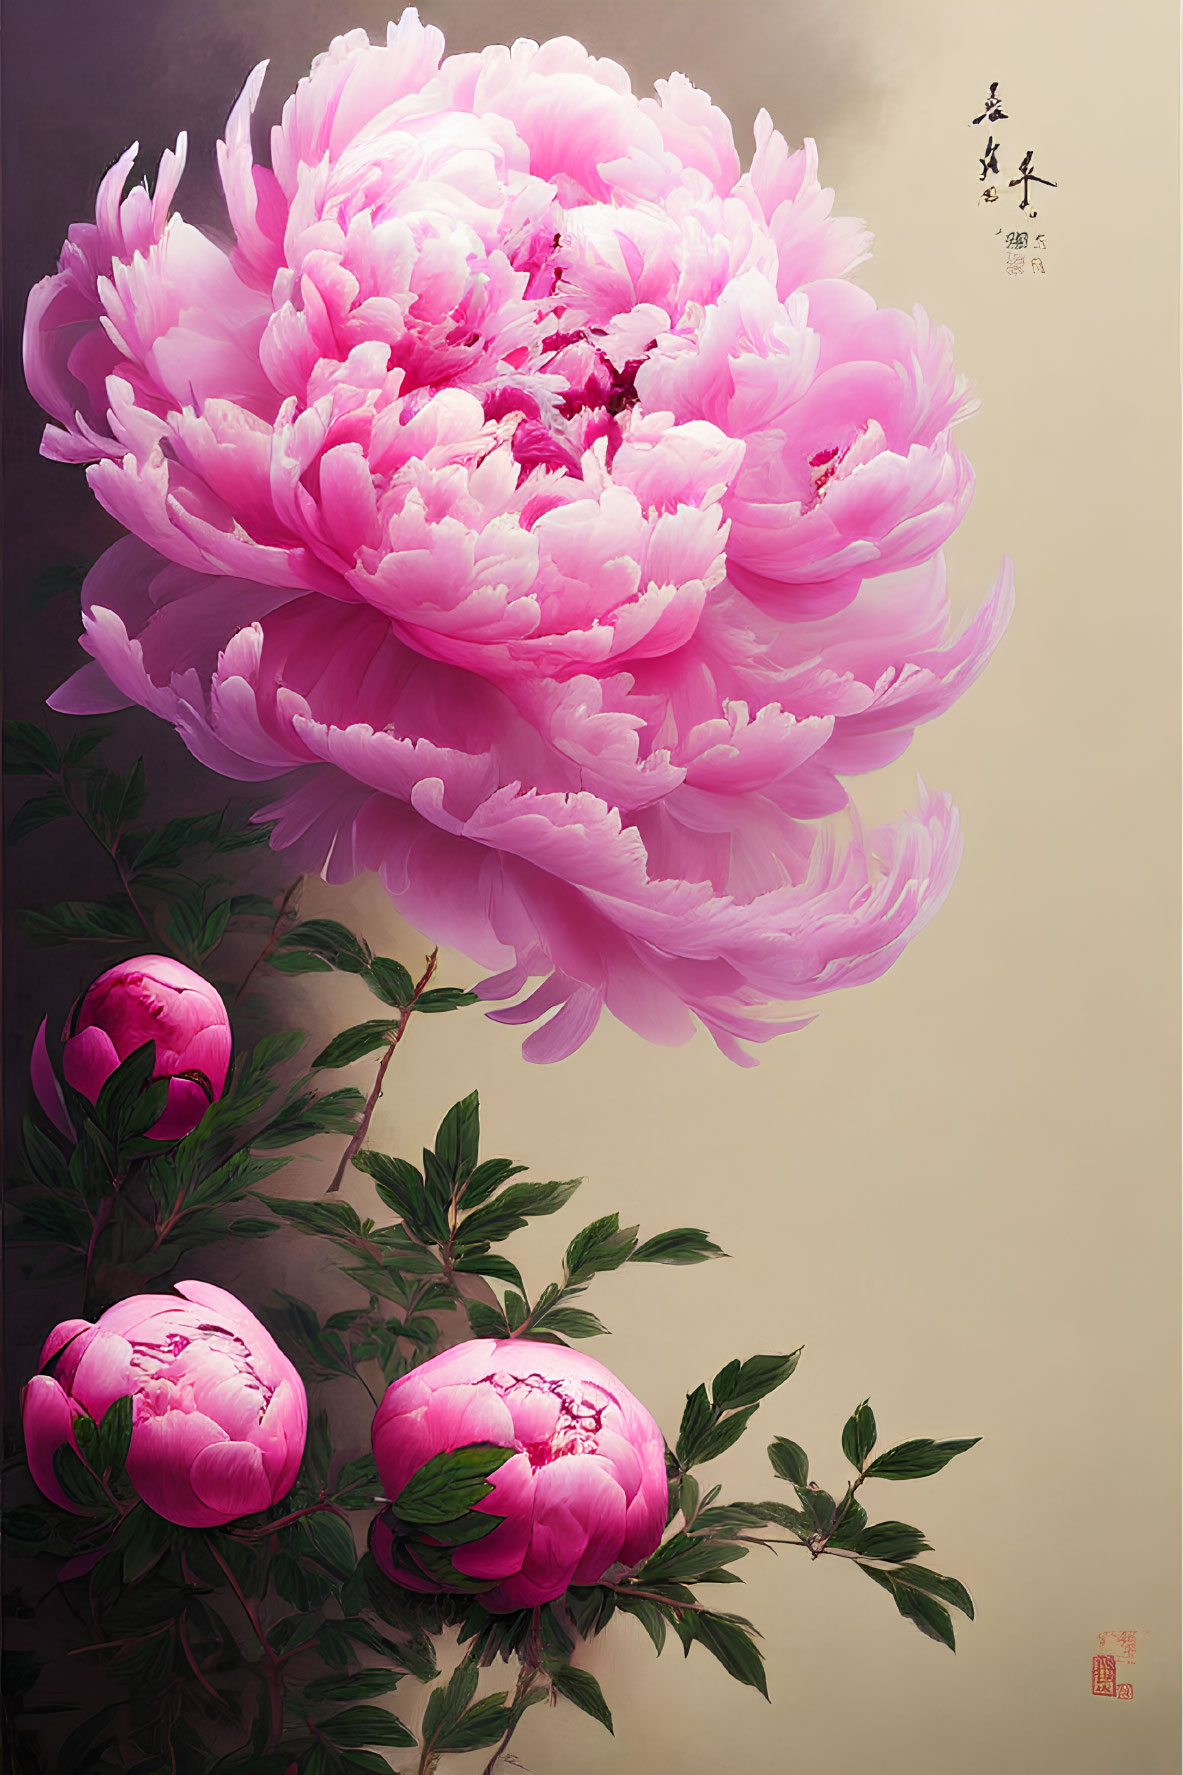 Detailed painting of large pink peony with Asian script